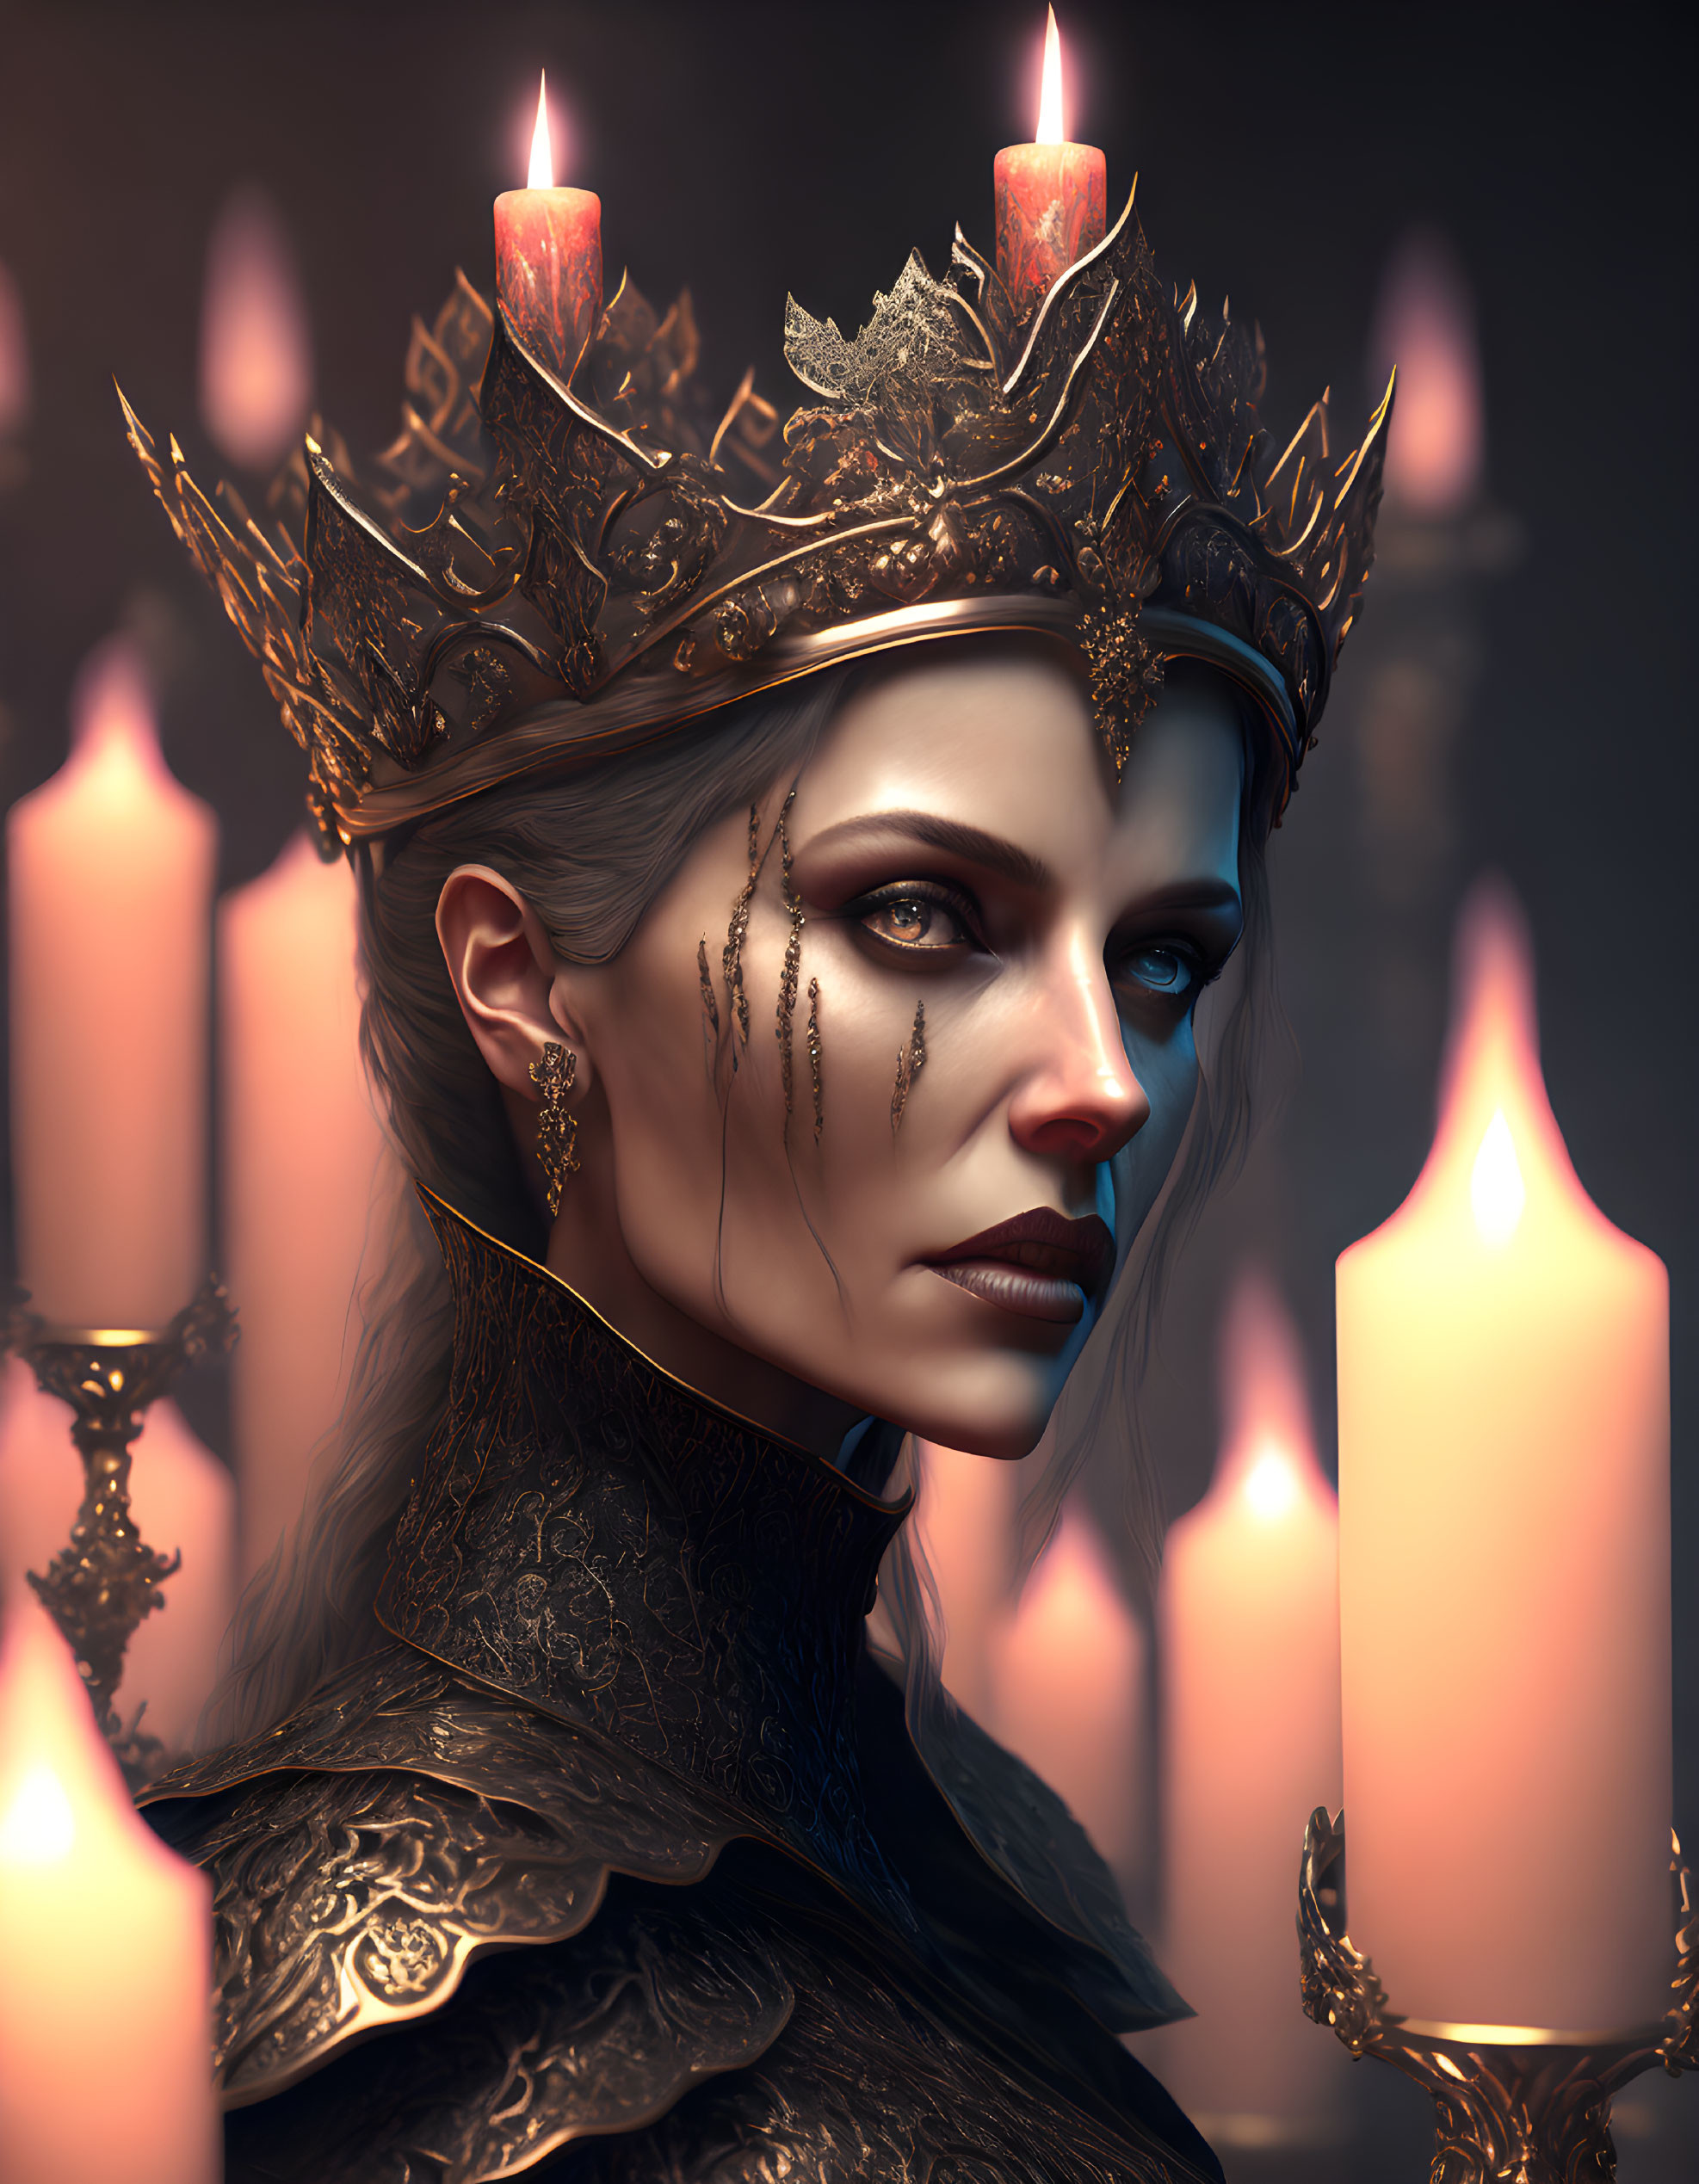 Regal woman with golden crown and jewelry in candlelit setting